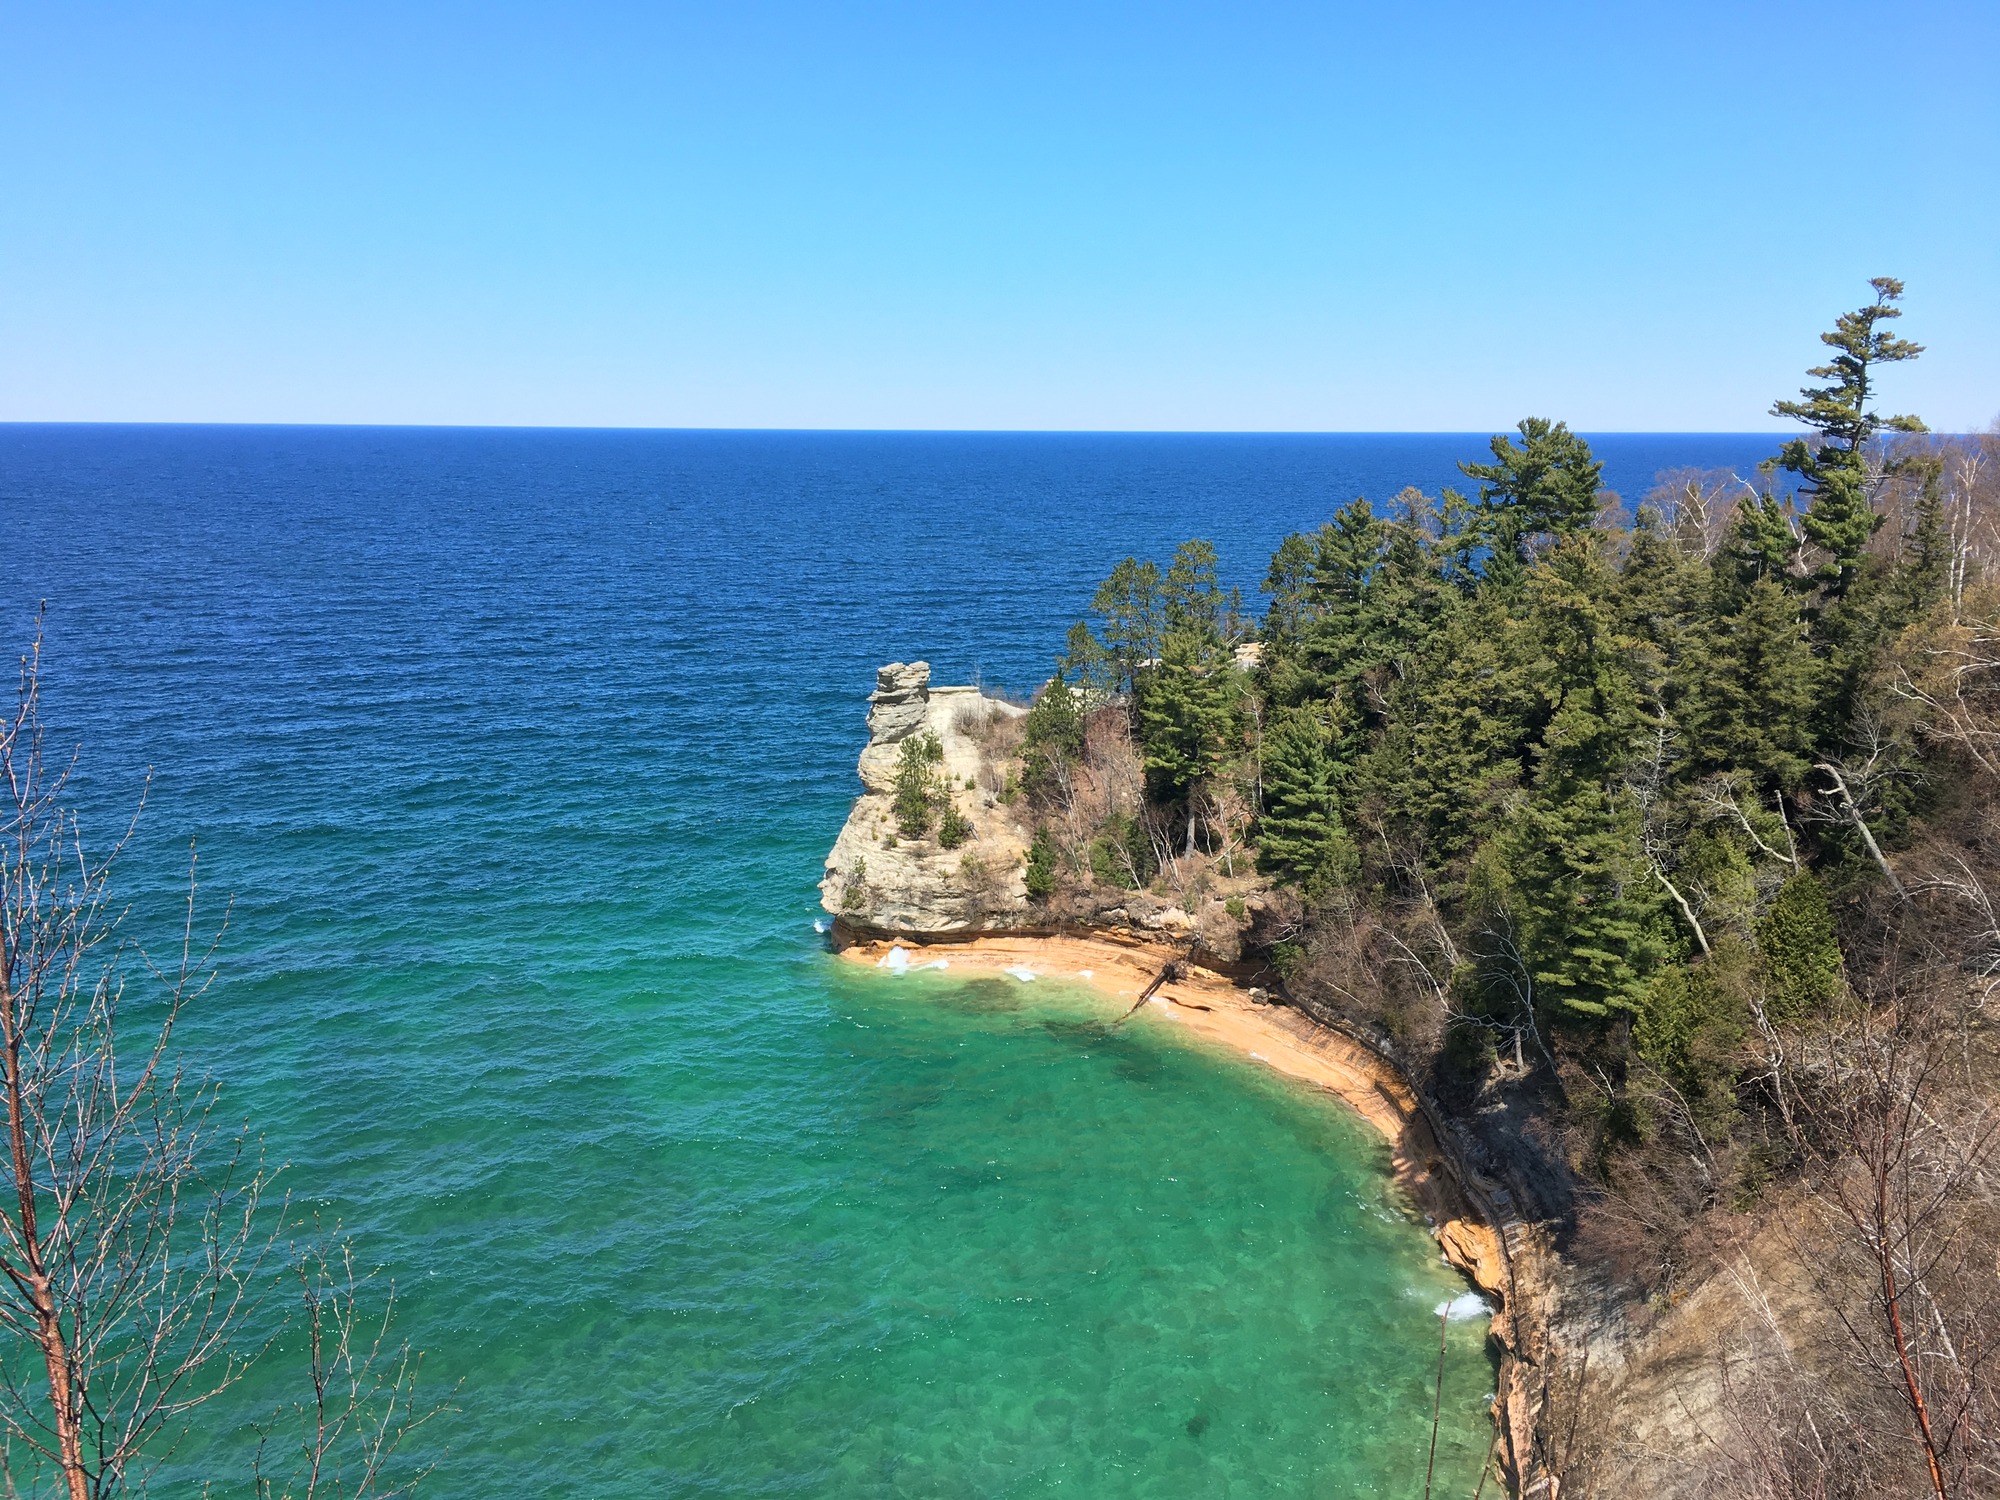 Sandstone rock formation that looks a little like part of a castle with a turret on top. It is at the end of a tree covered cliff that sticks out into Lake Superior.